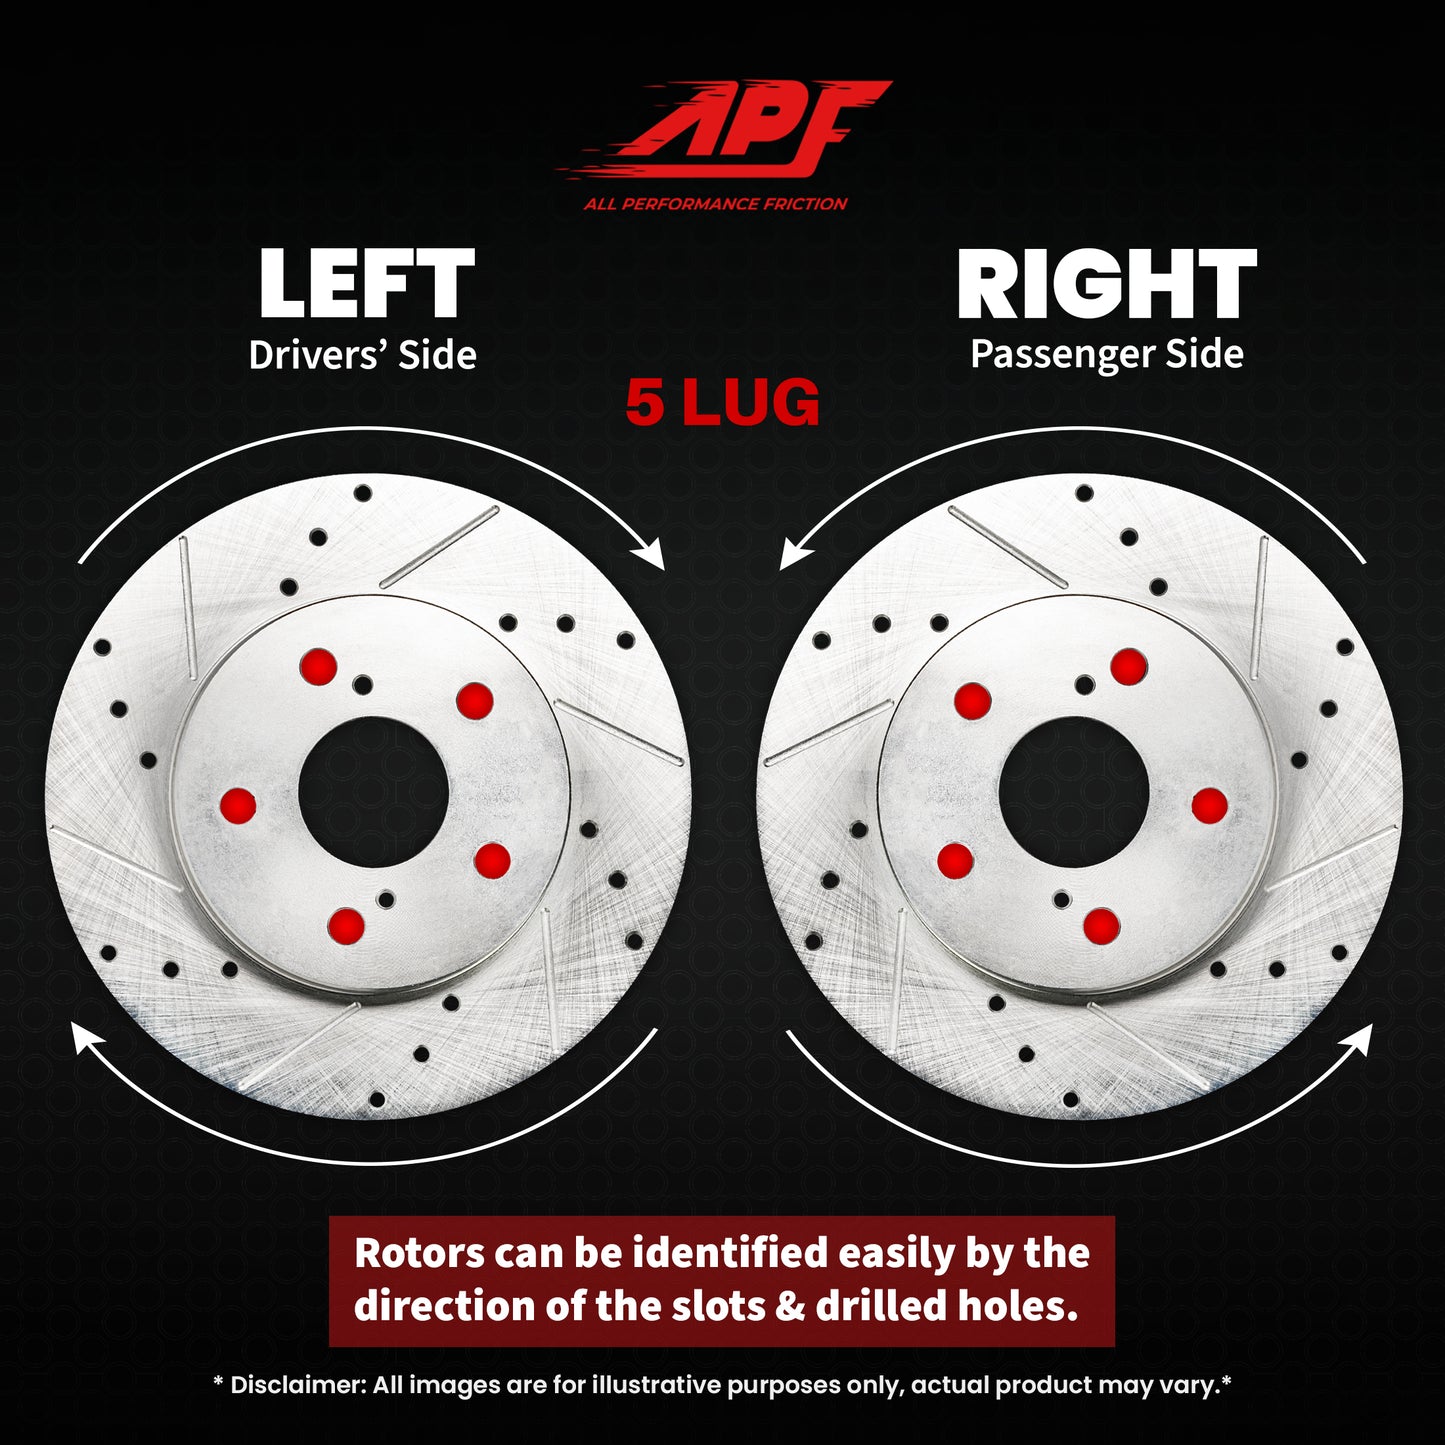 APF All Performance Friction Front Rotors compatible with Honda Pilot 2003-2008 Zinc Drilled Slotted Rotors | $148.9